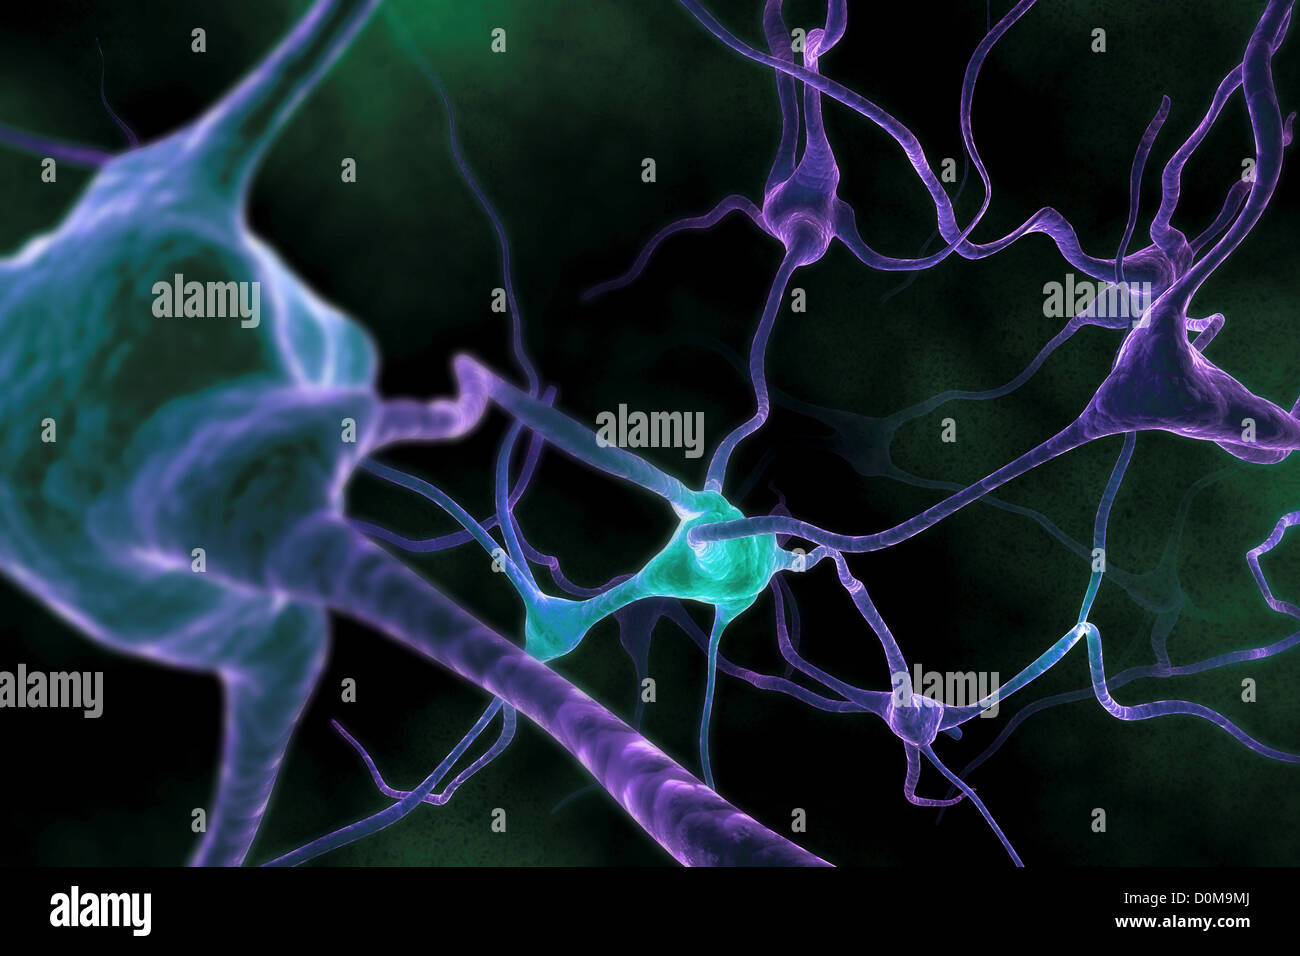 Microscopic styled visualization of neurons. Stock Photo